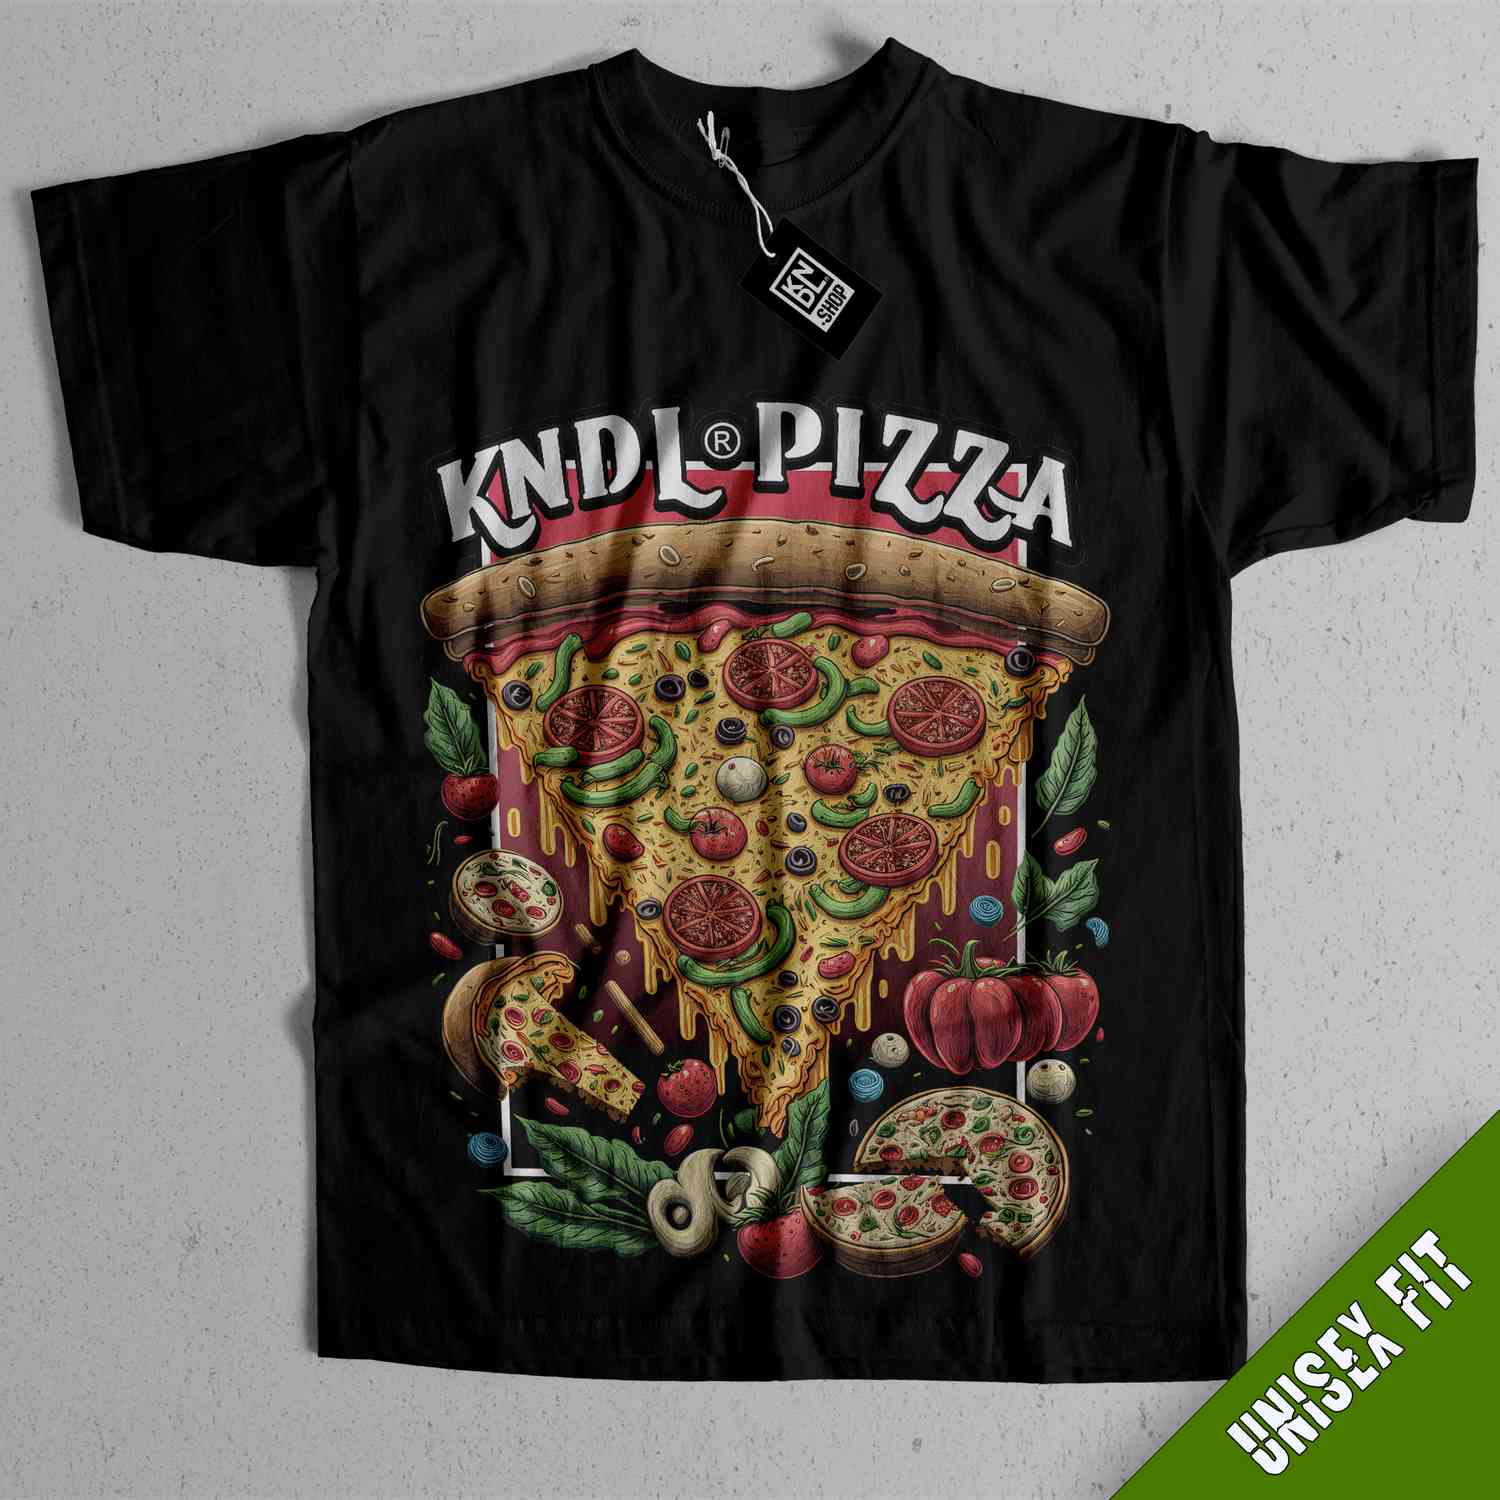 a black shirt with a picture of a pizza on it